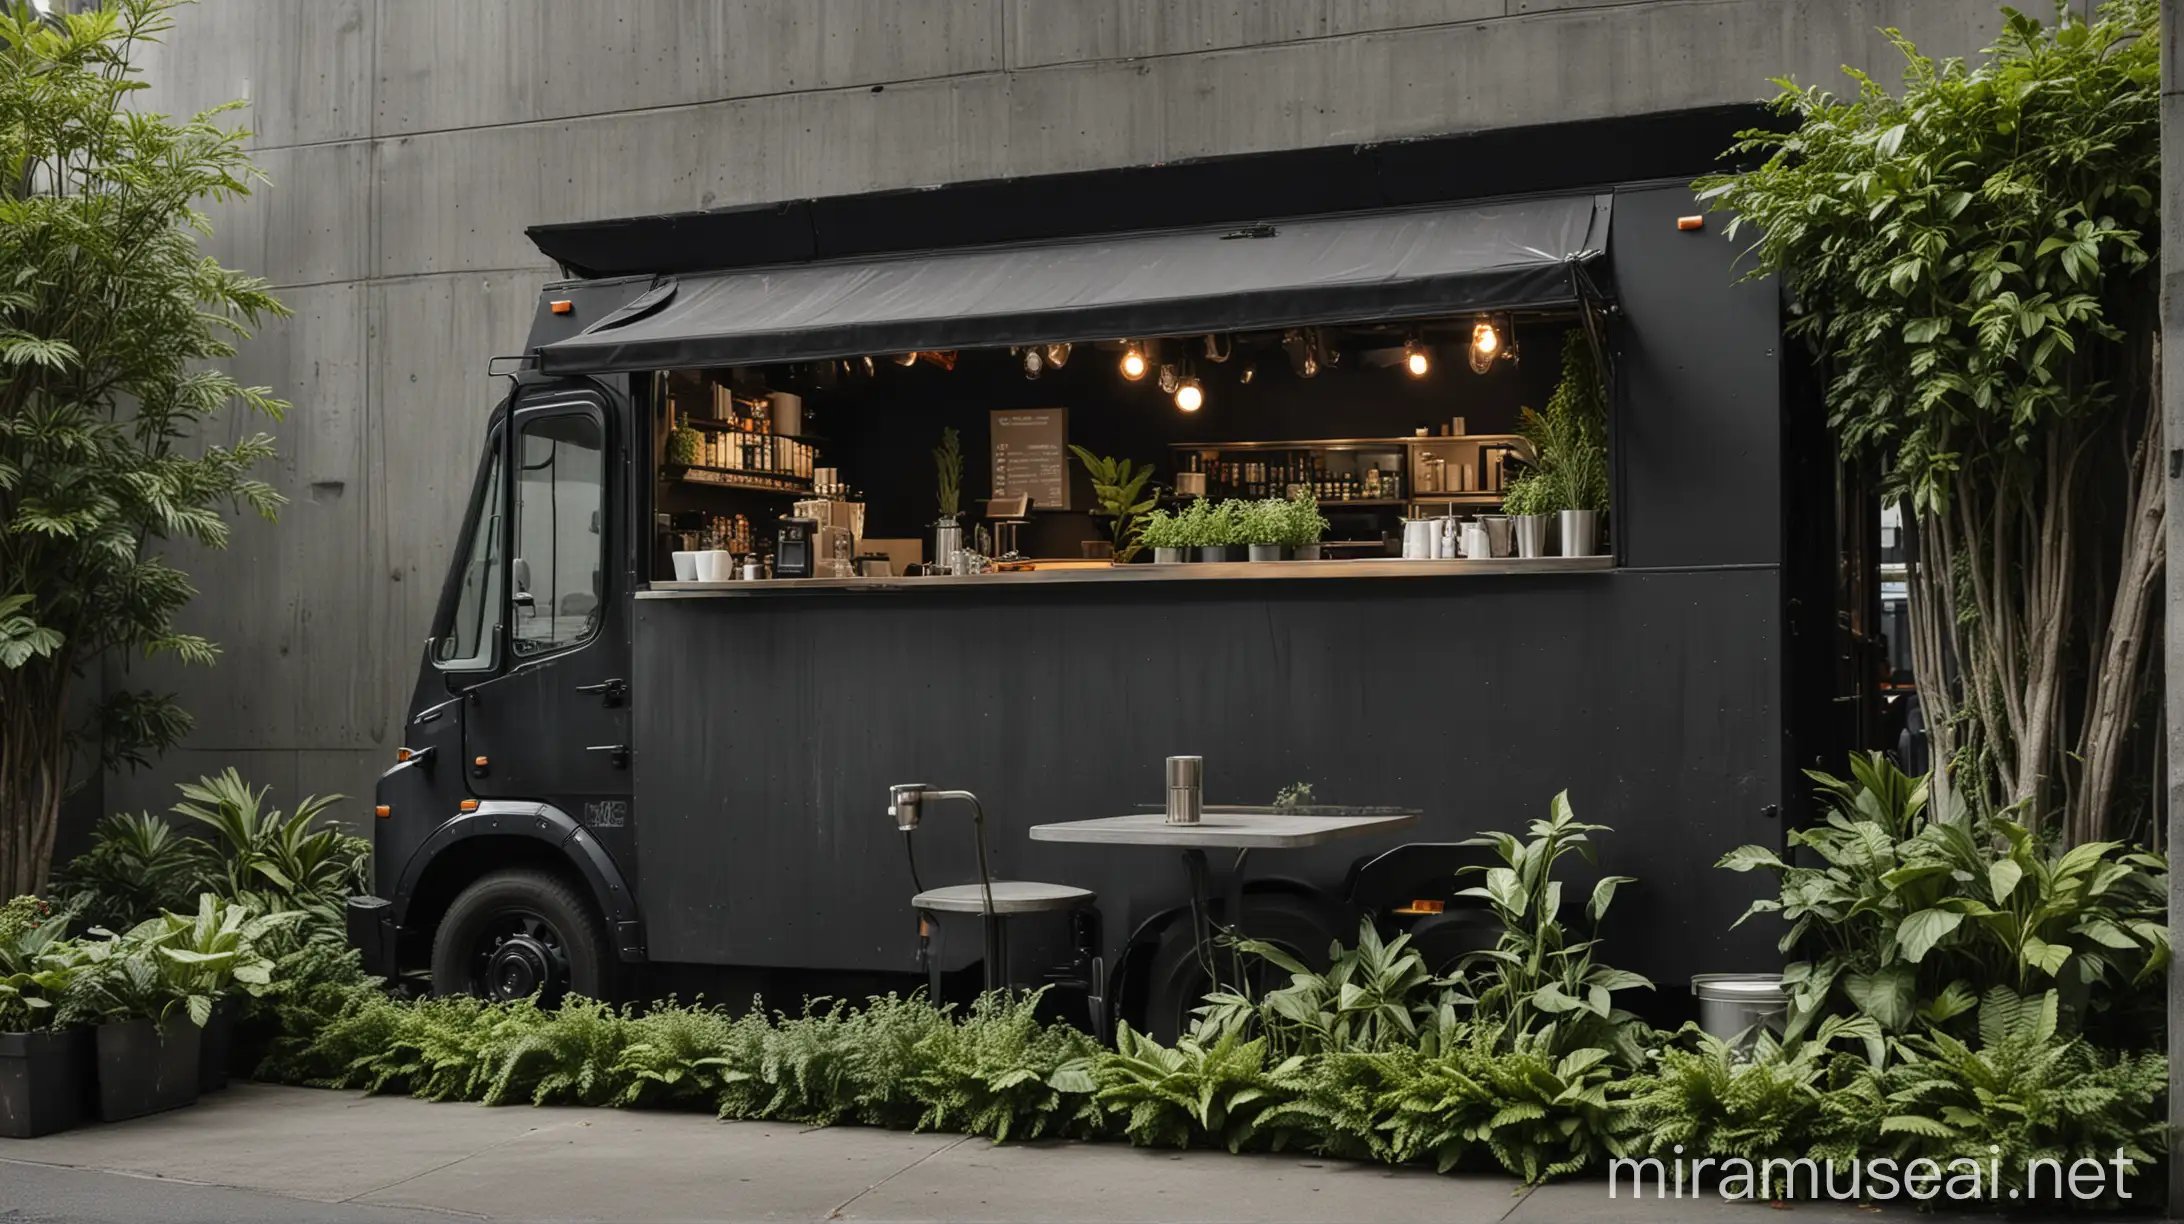 Urban Coffee Truck Interior with Concrete Walls and Greenery View